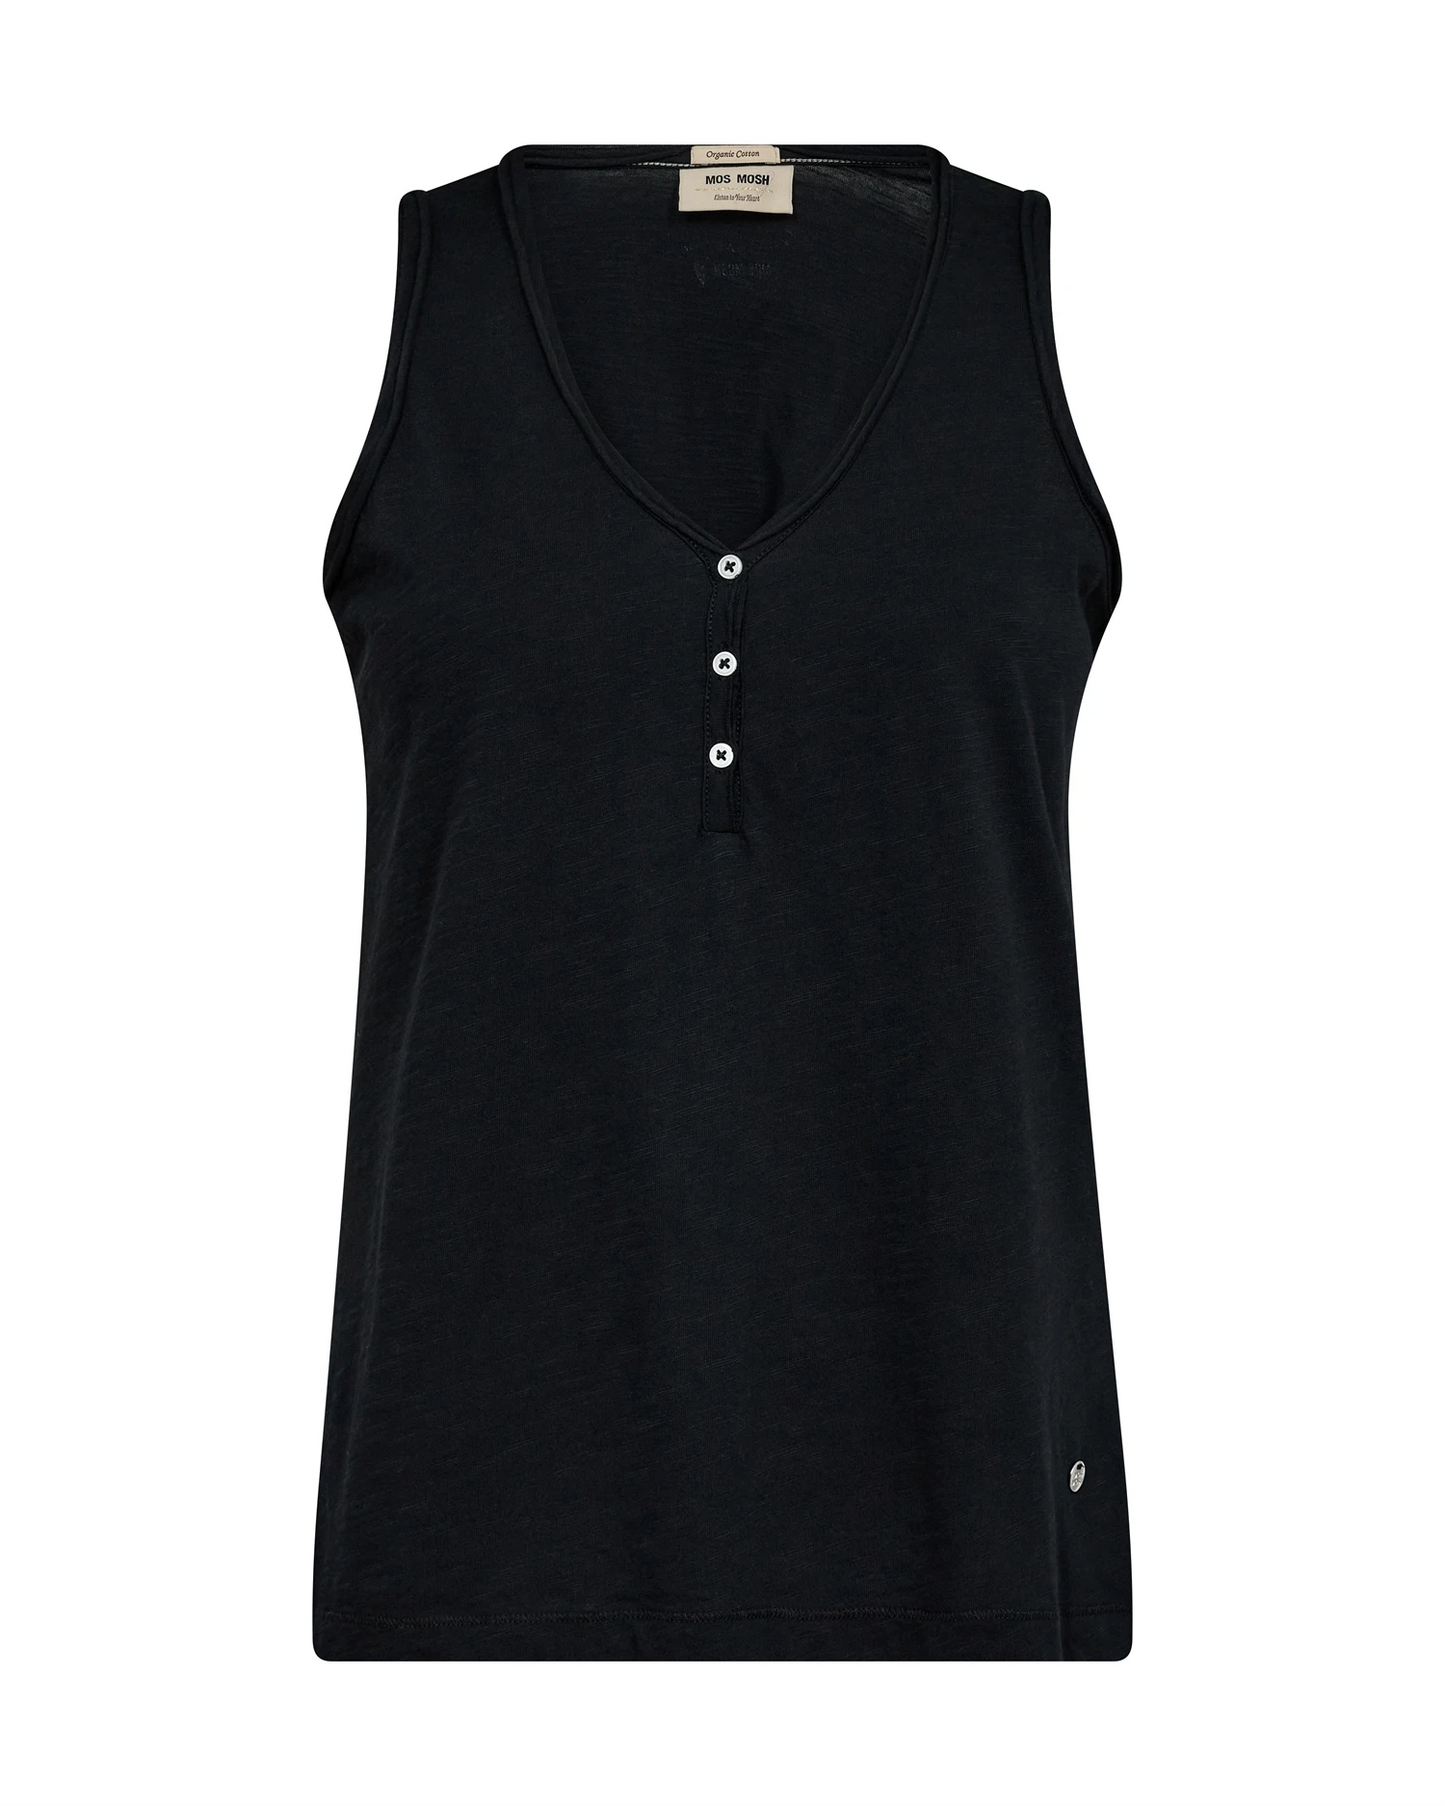 A great basic tank from Scandi brand Mos Mosh in a super soft fabric with V neck and button front 